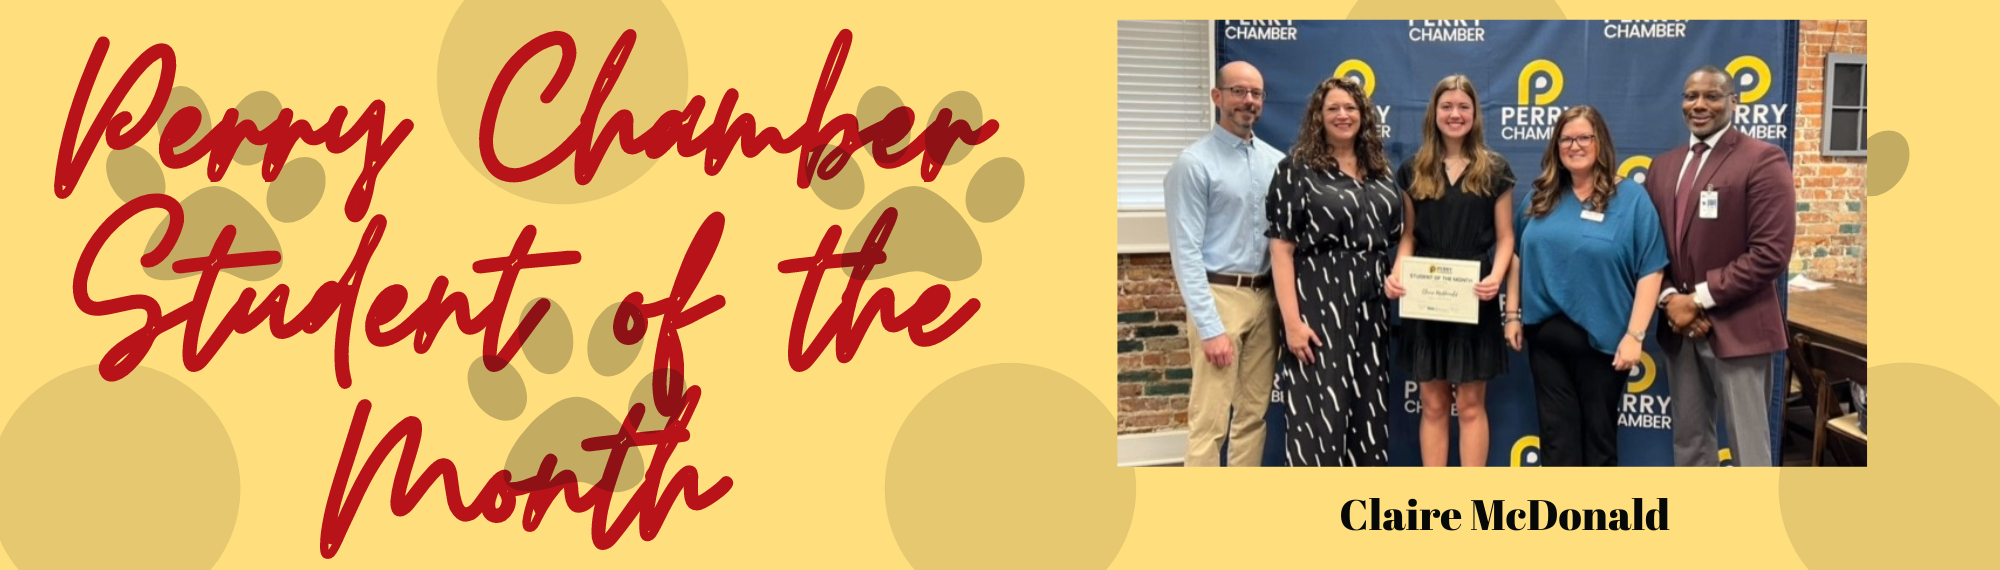 Chamber Student of the Month